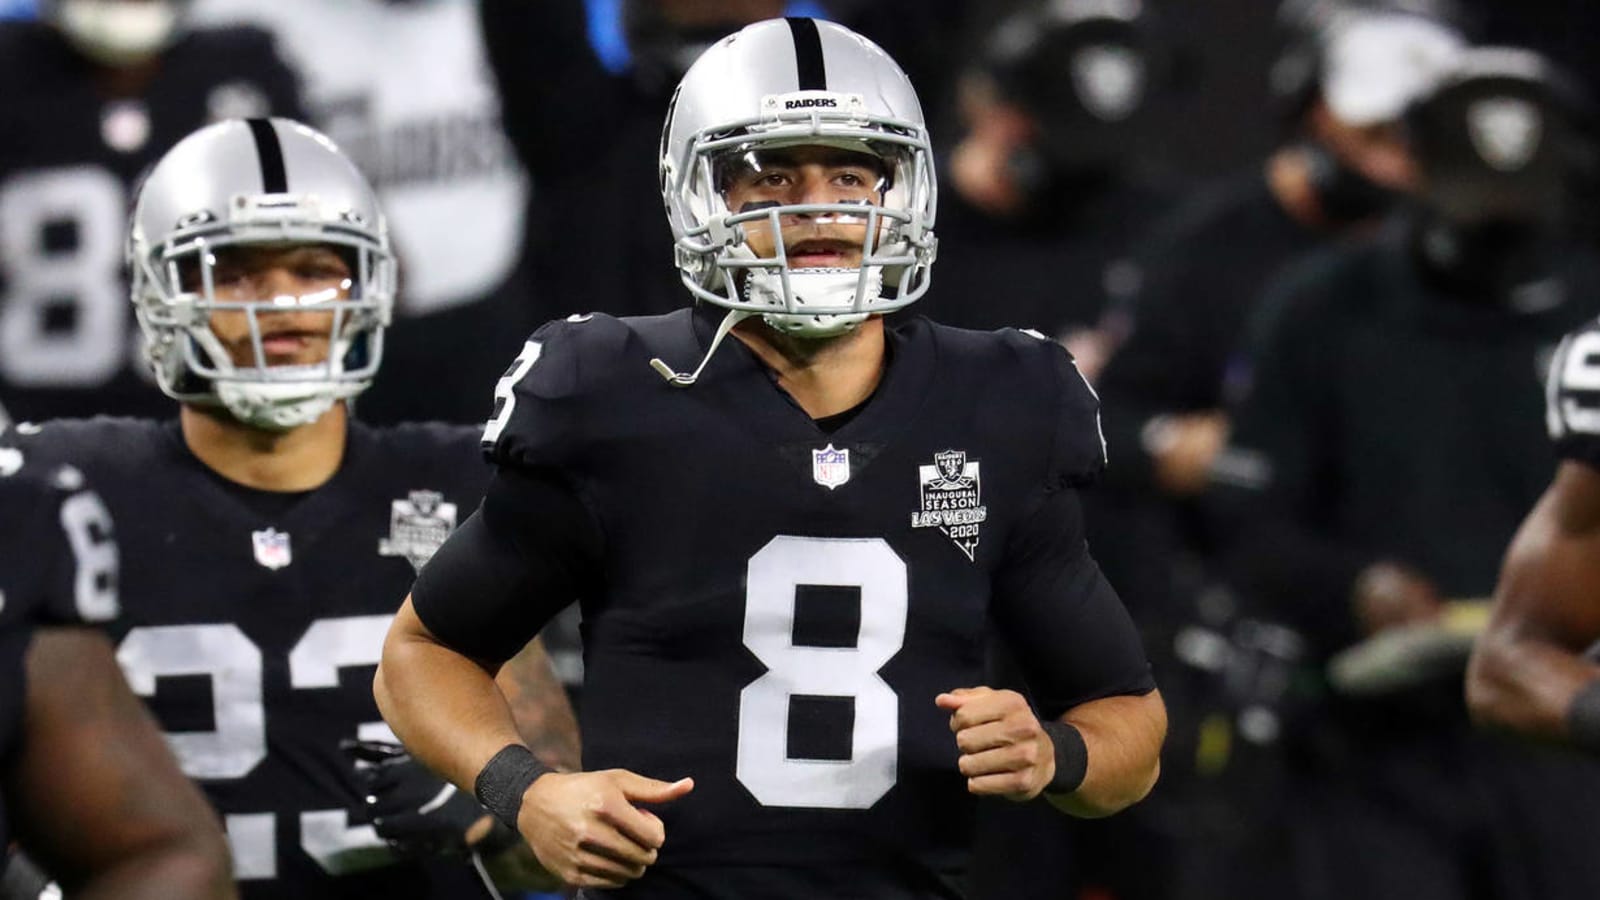 Raiders to release Mariota if he doesn't take big pay cut?